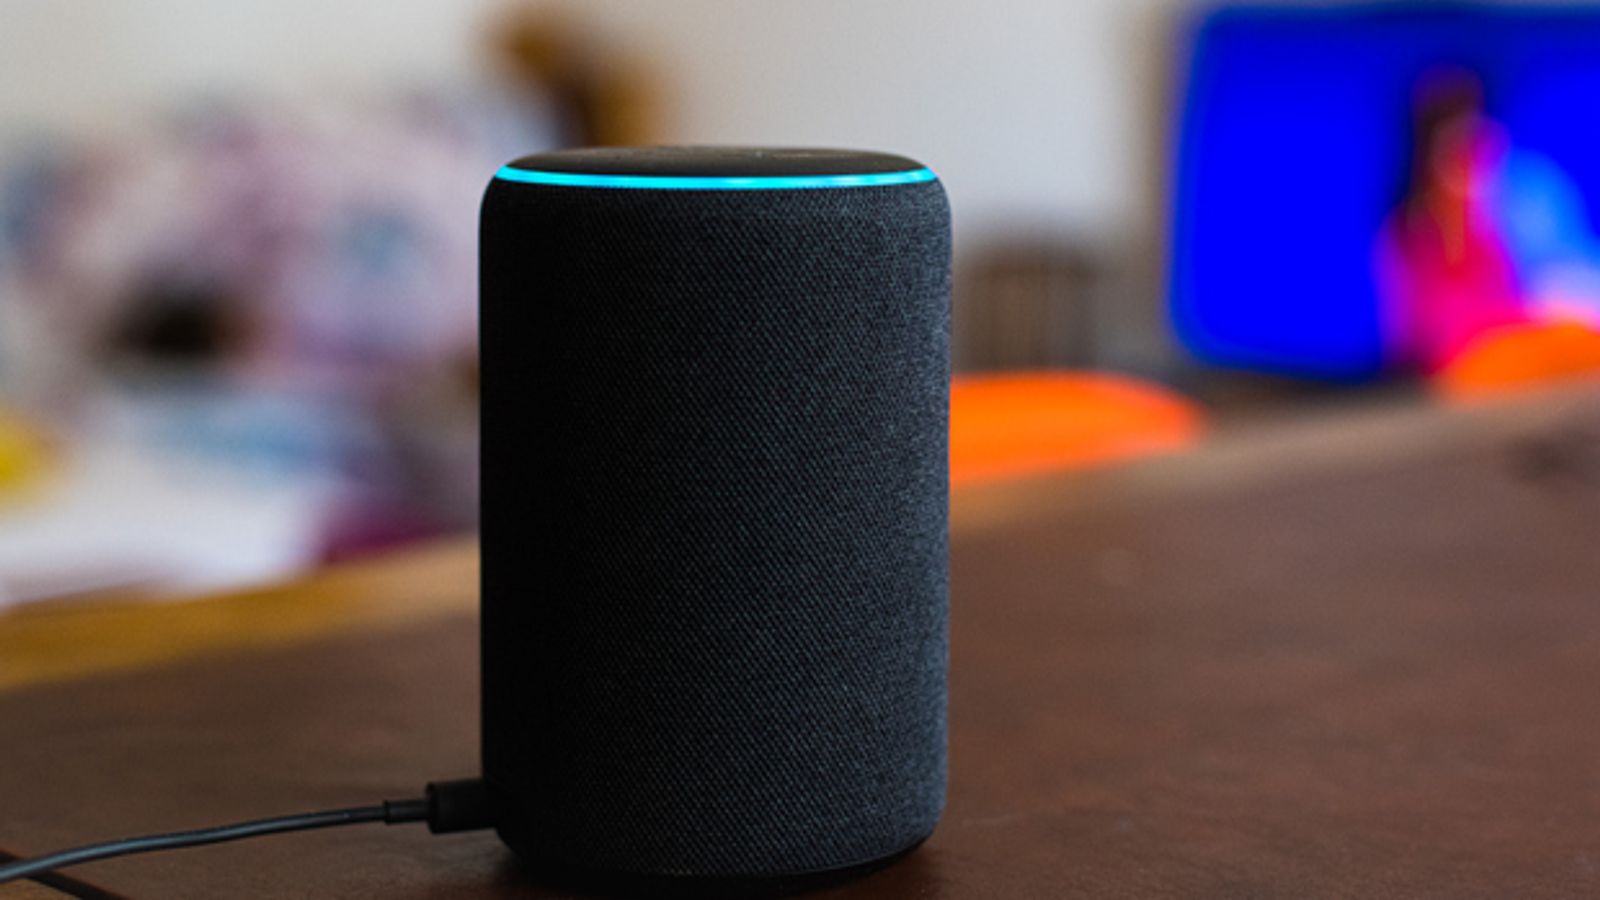 Alexa Gets New Feature to Alert You of Package Deliveries